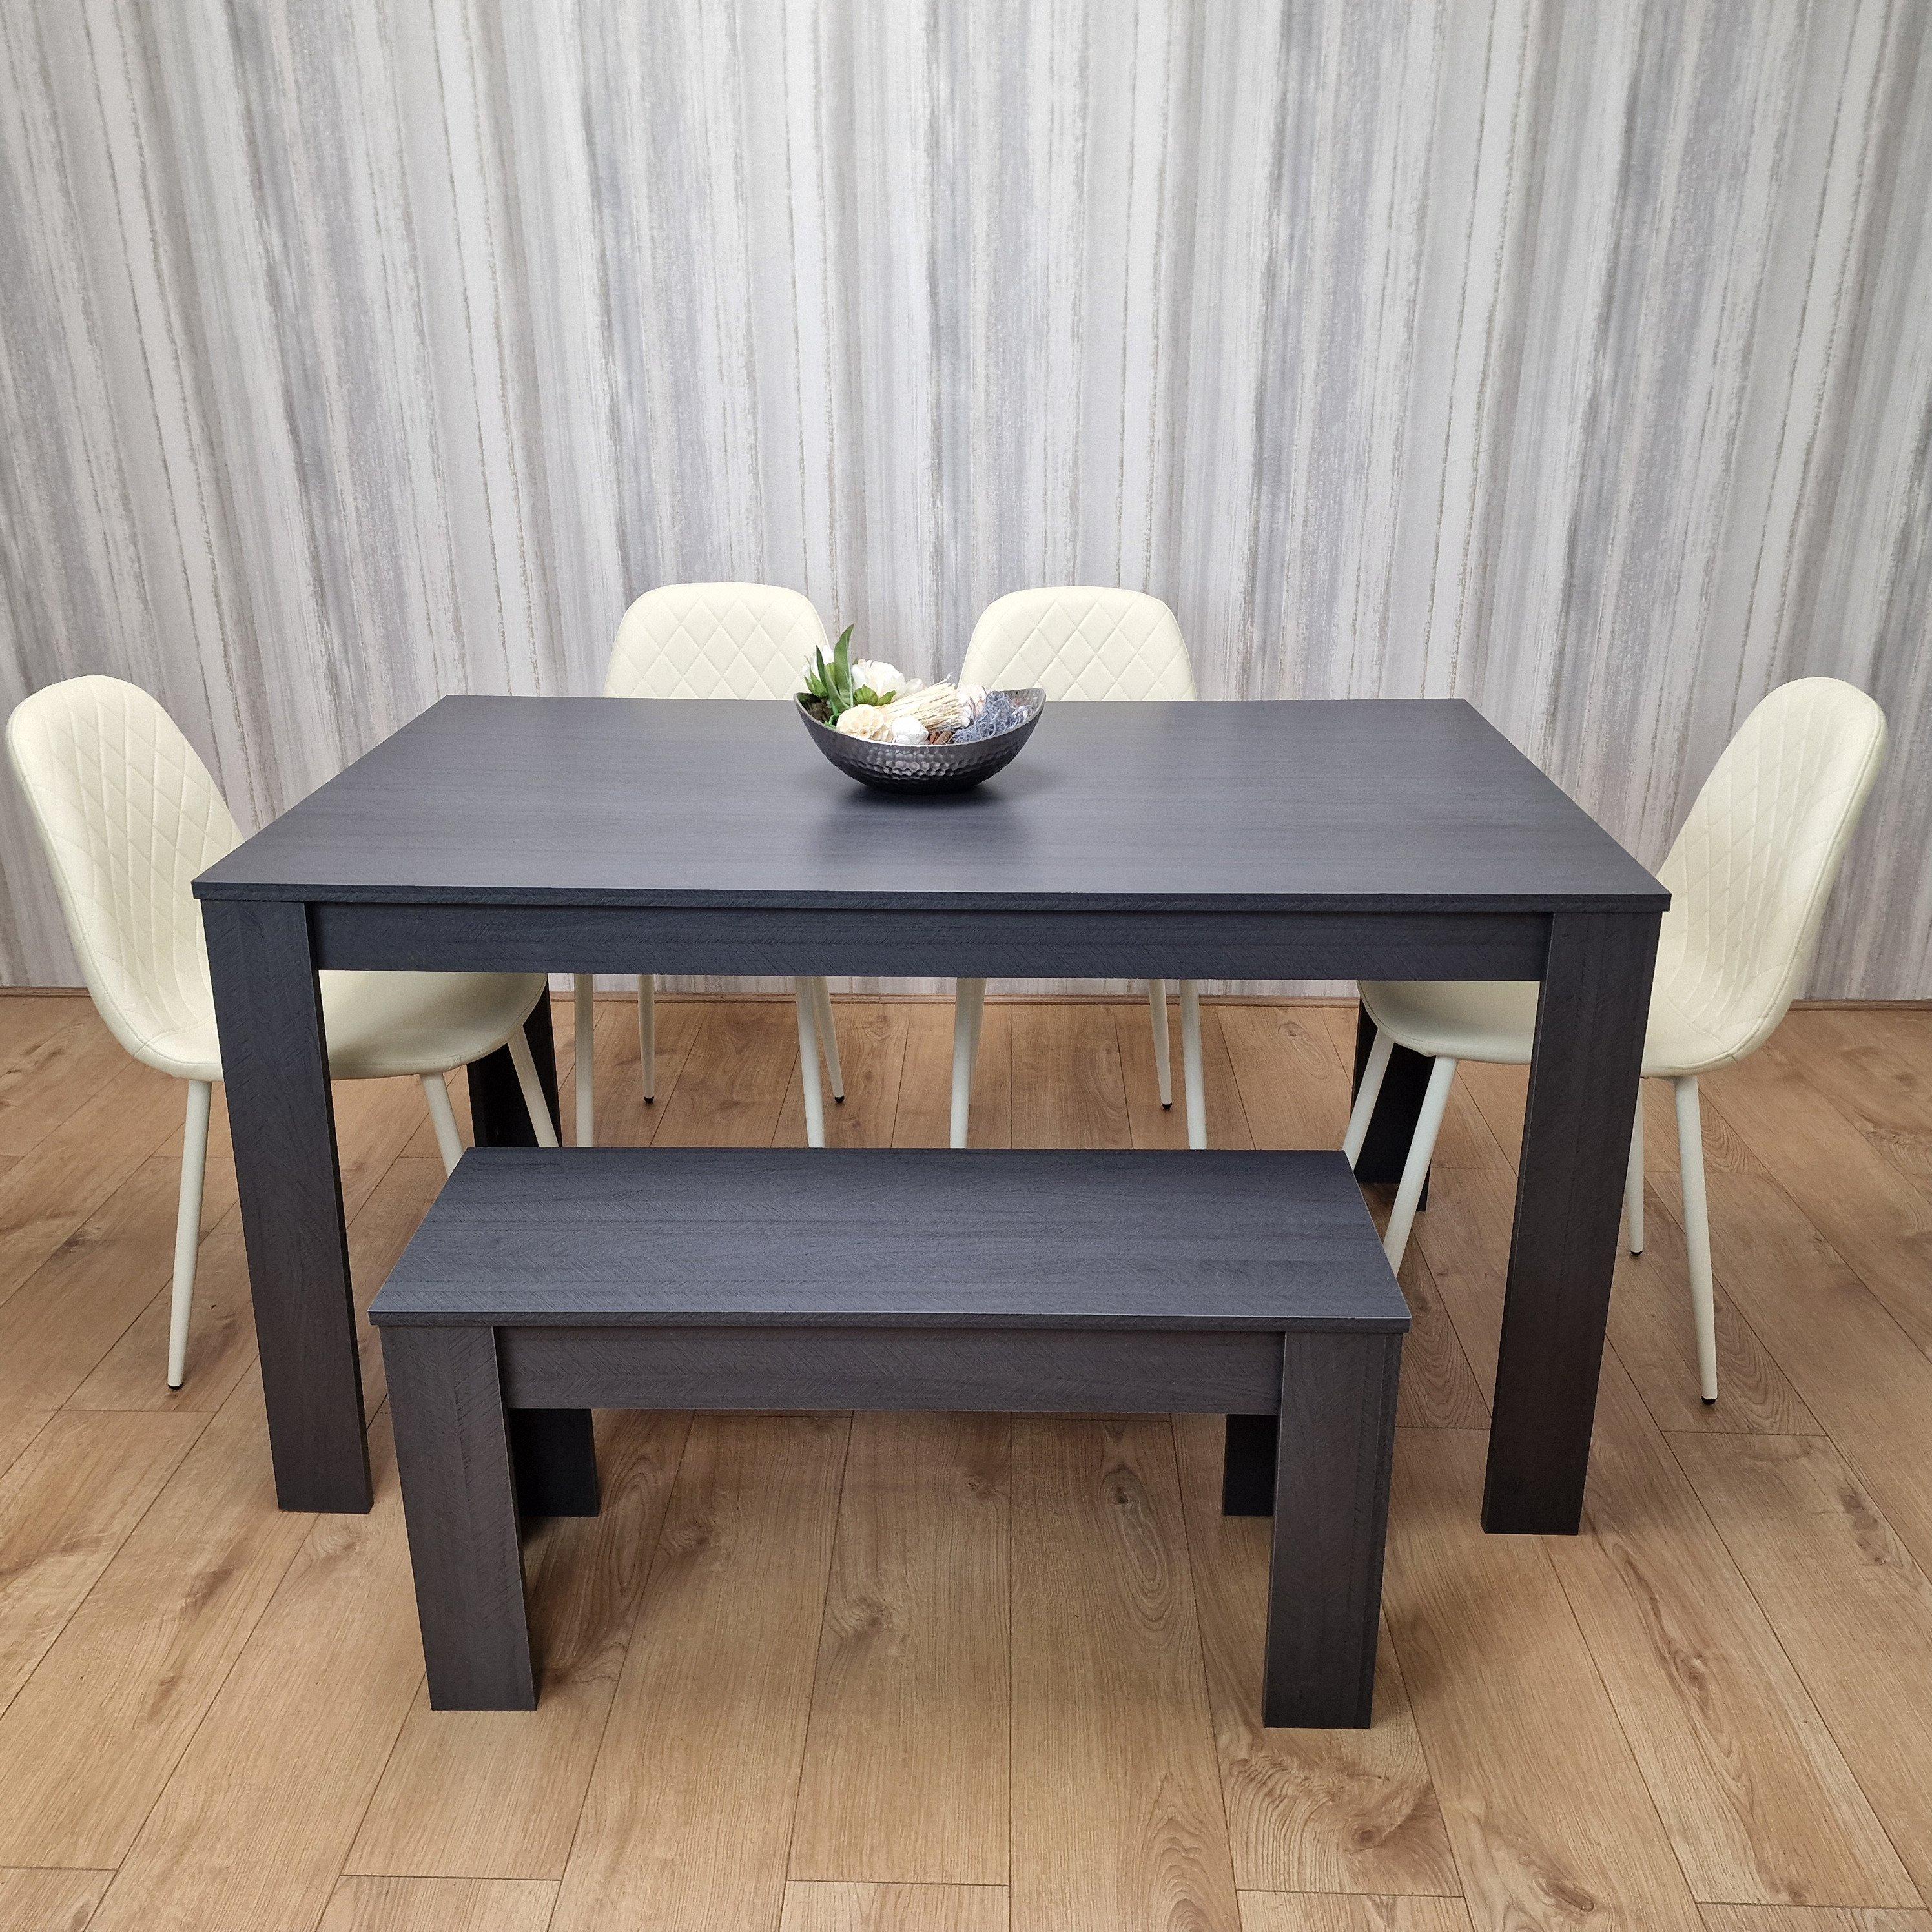 Dining Set: Grey Table, 4 Diamond-Pattern Cream Chairs, And 1 Bench. Kitchen Dining Table For 4